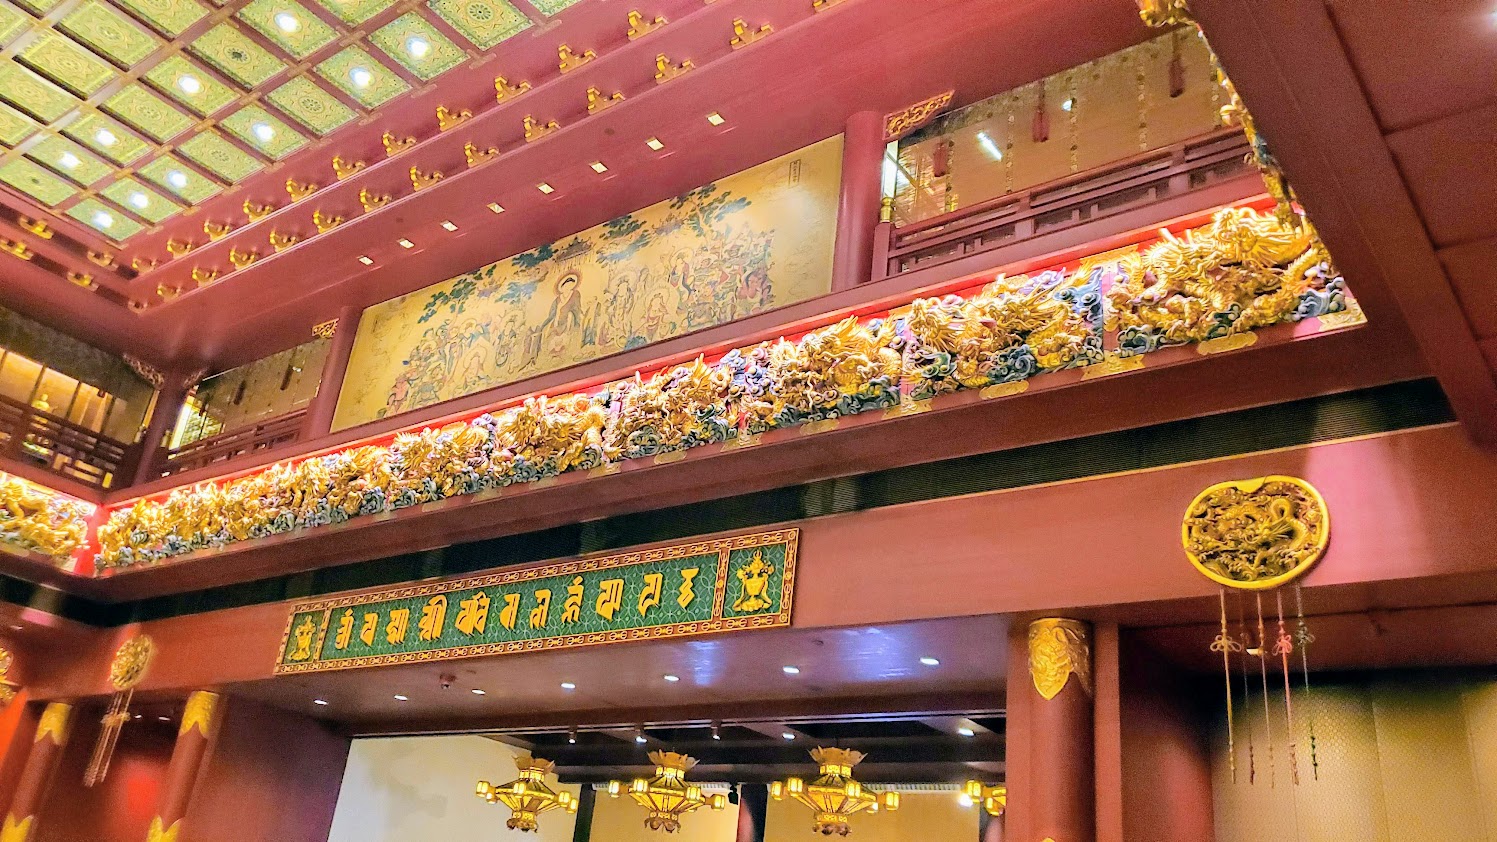 Things to do in Singapore: visit Buddha Tooth Relic Temple and Museum